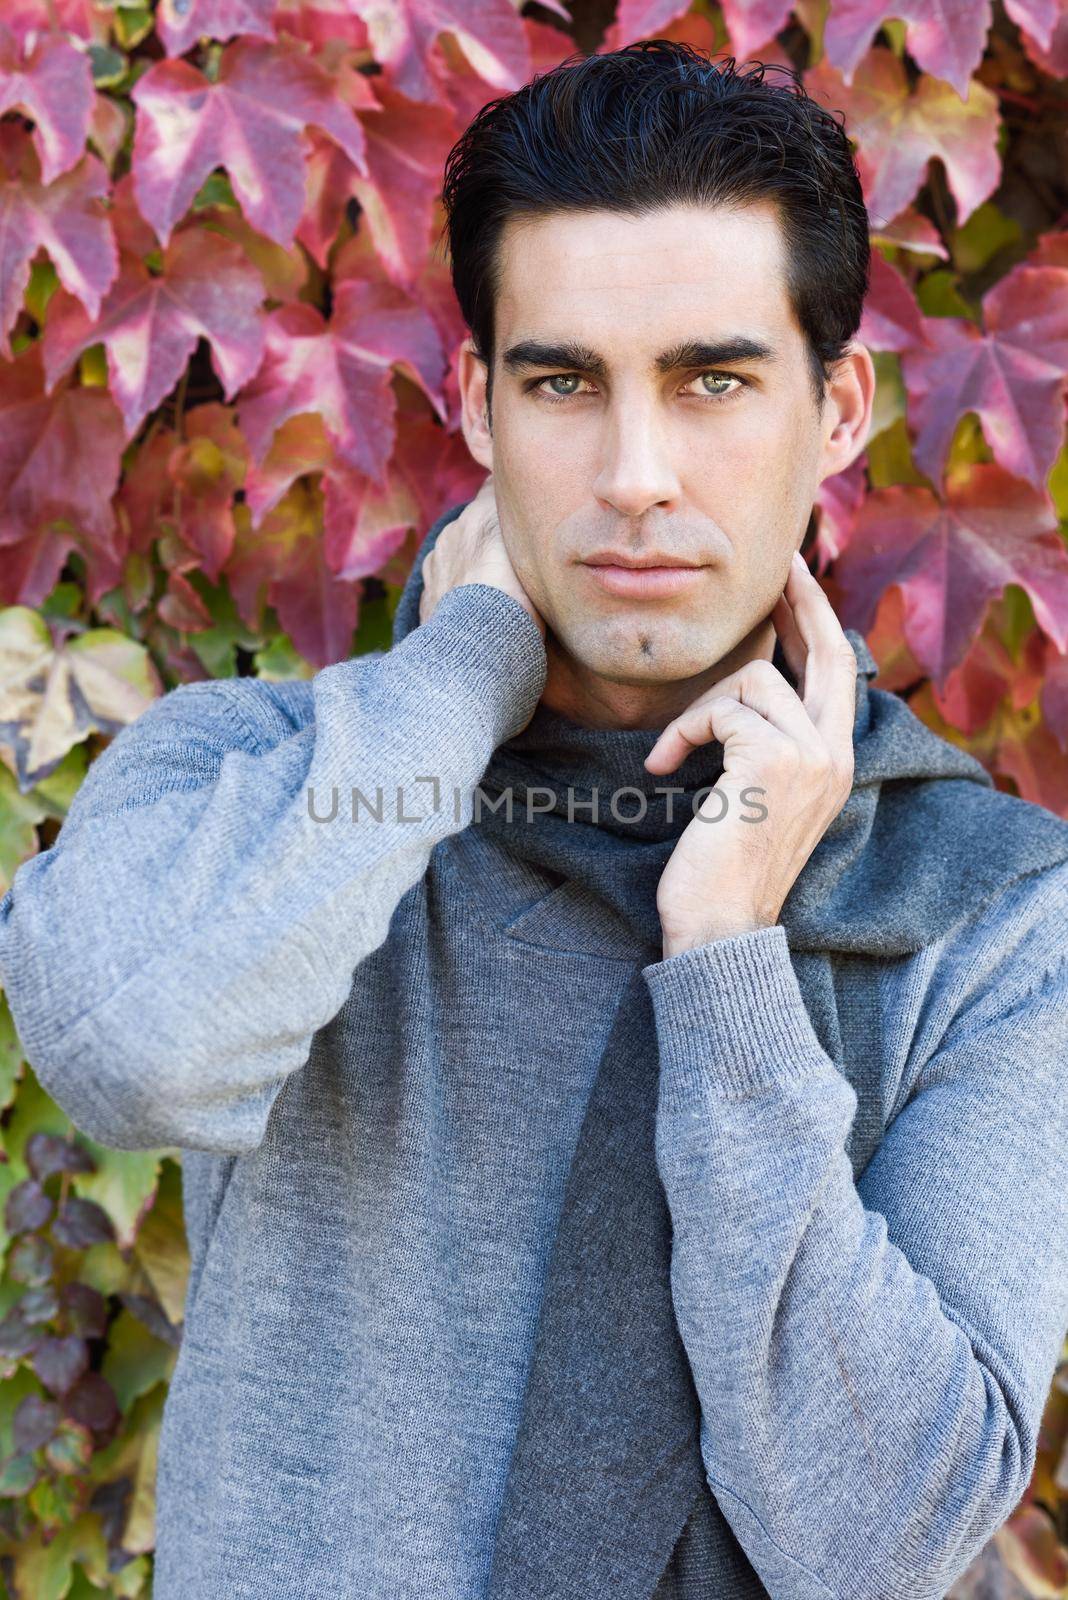 Handsome man wearing winter clothes in autumn leaves background by javiindy